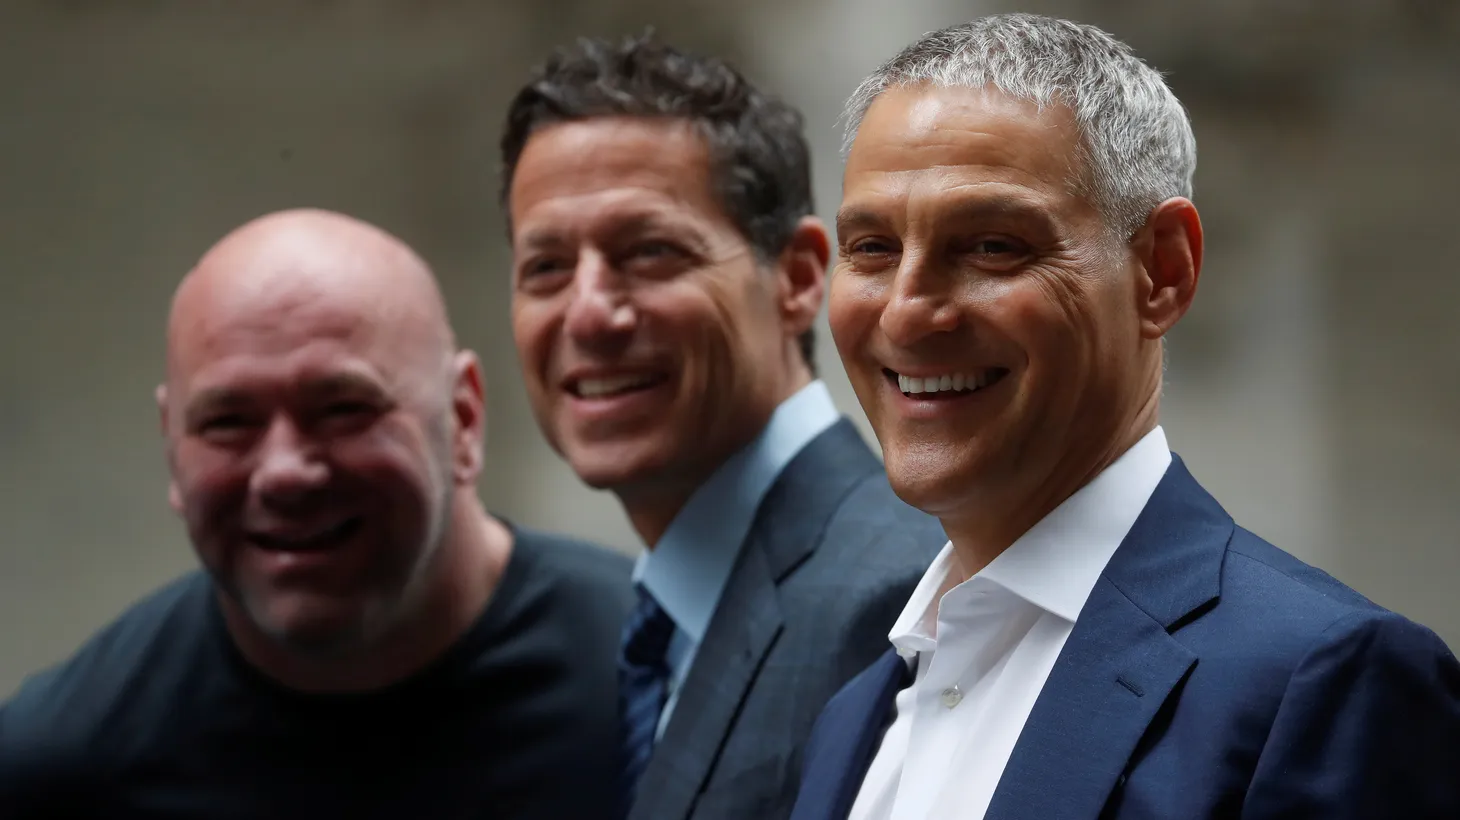 Ari Emanuel, CEO of William Morris Endeavor (right), stands next to Endeavor President Mark Shapiro (center) and UFC President Dana White during the public listing of EDR on the NYSE in New York City on April 29, 2021.